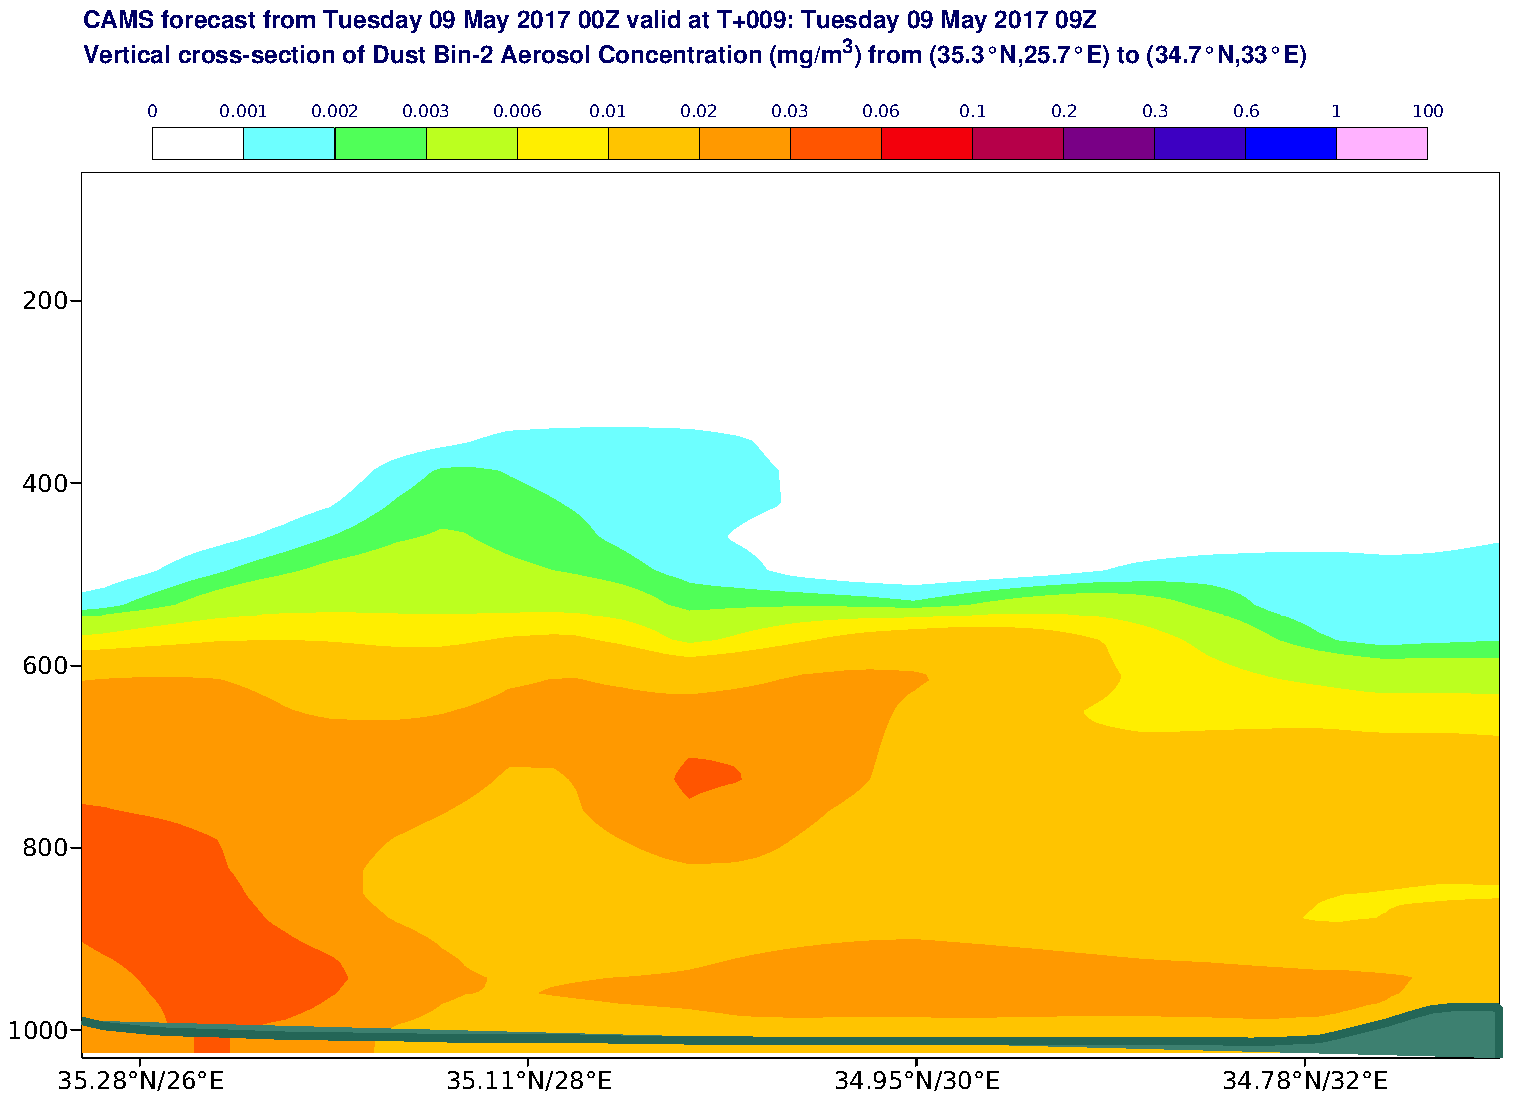 Vertical cross-section of Dust Bin-2 Aerosol Concentration (mg/m3) valid at T9 - 2017-05-09 09:00